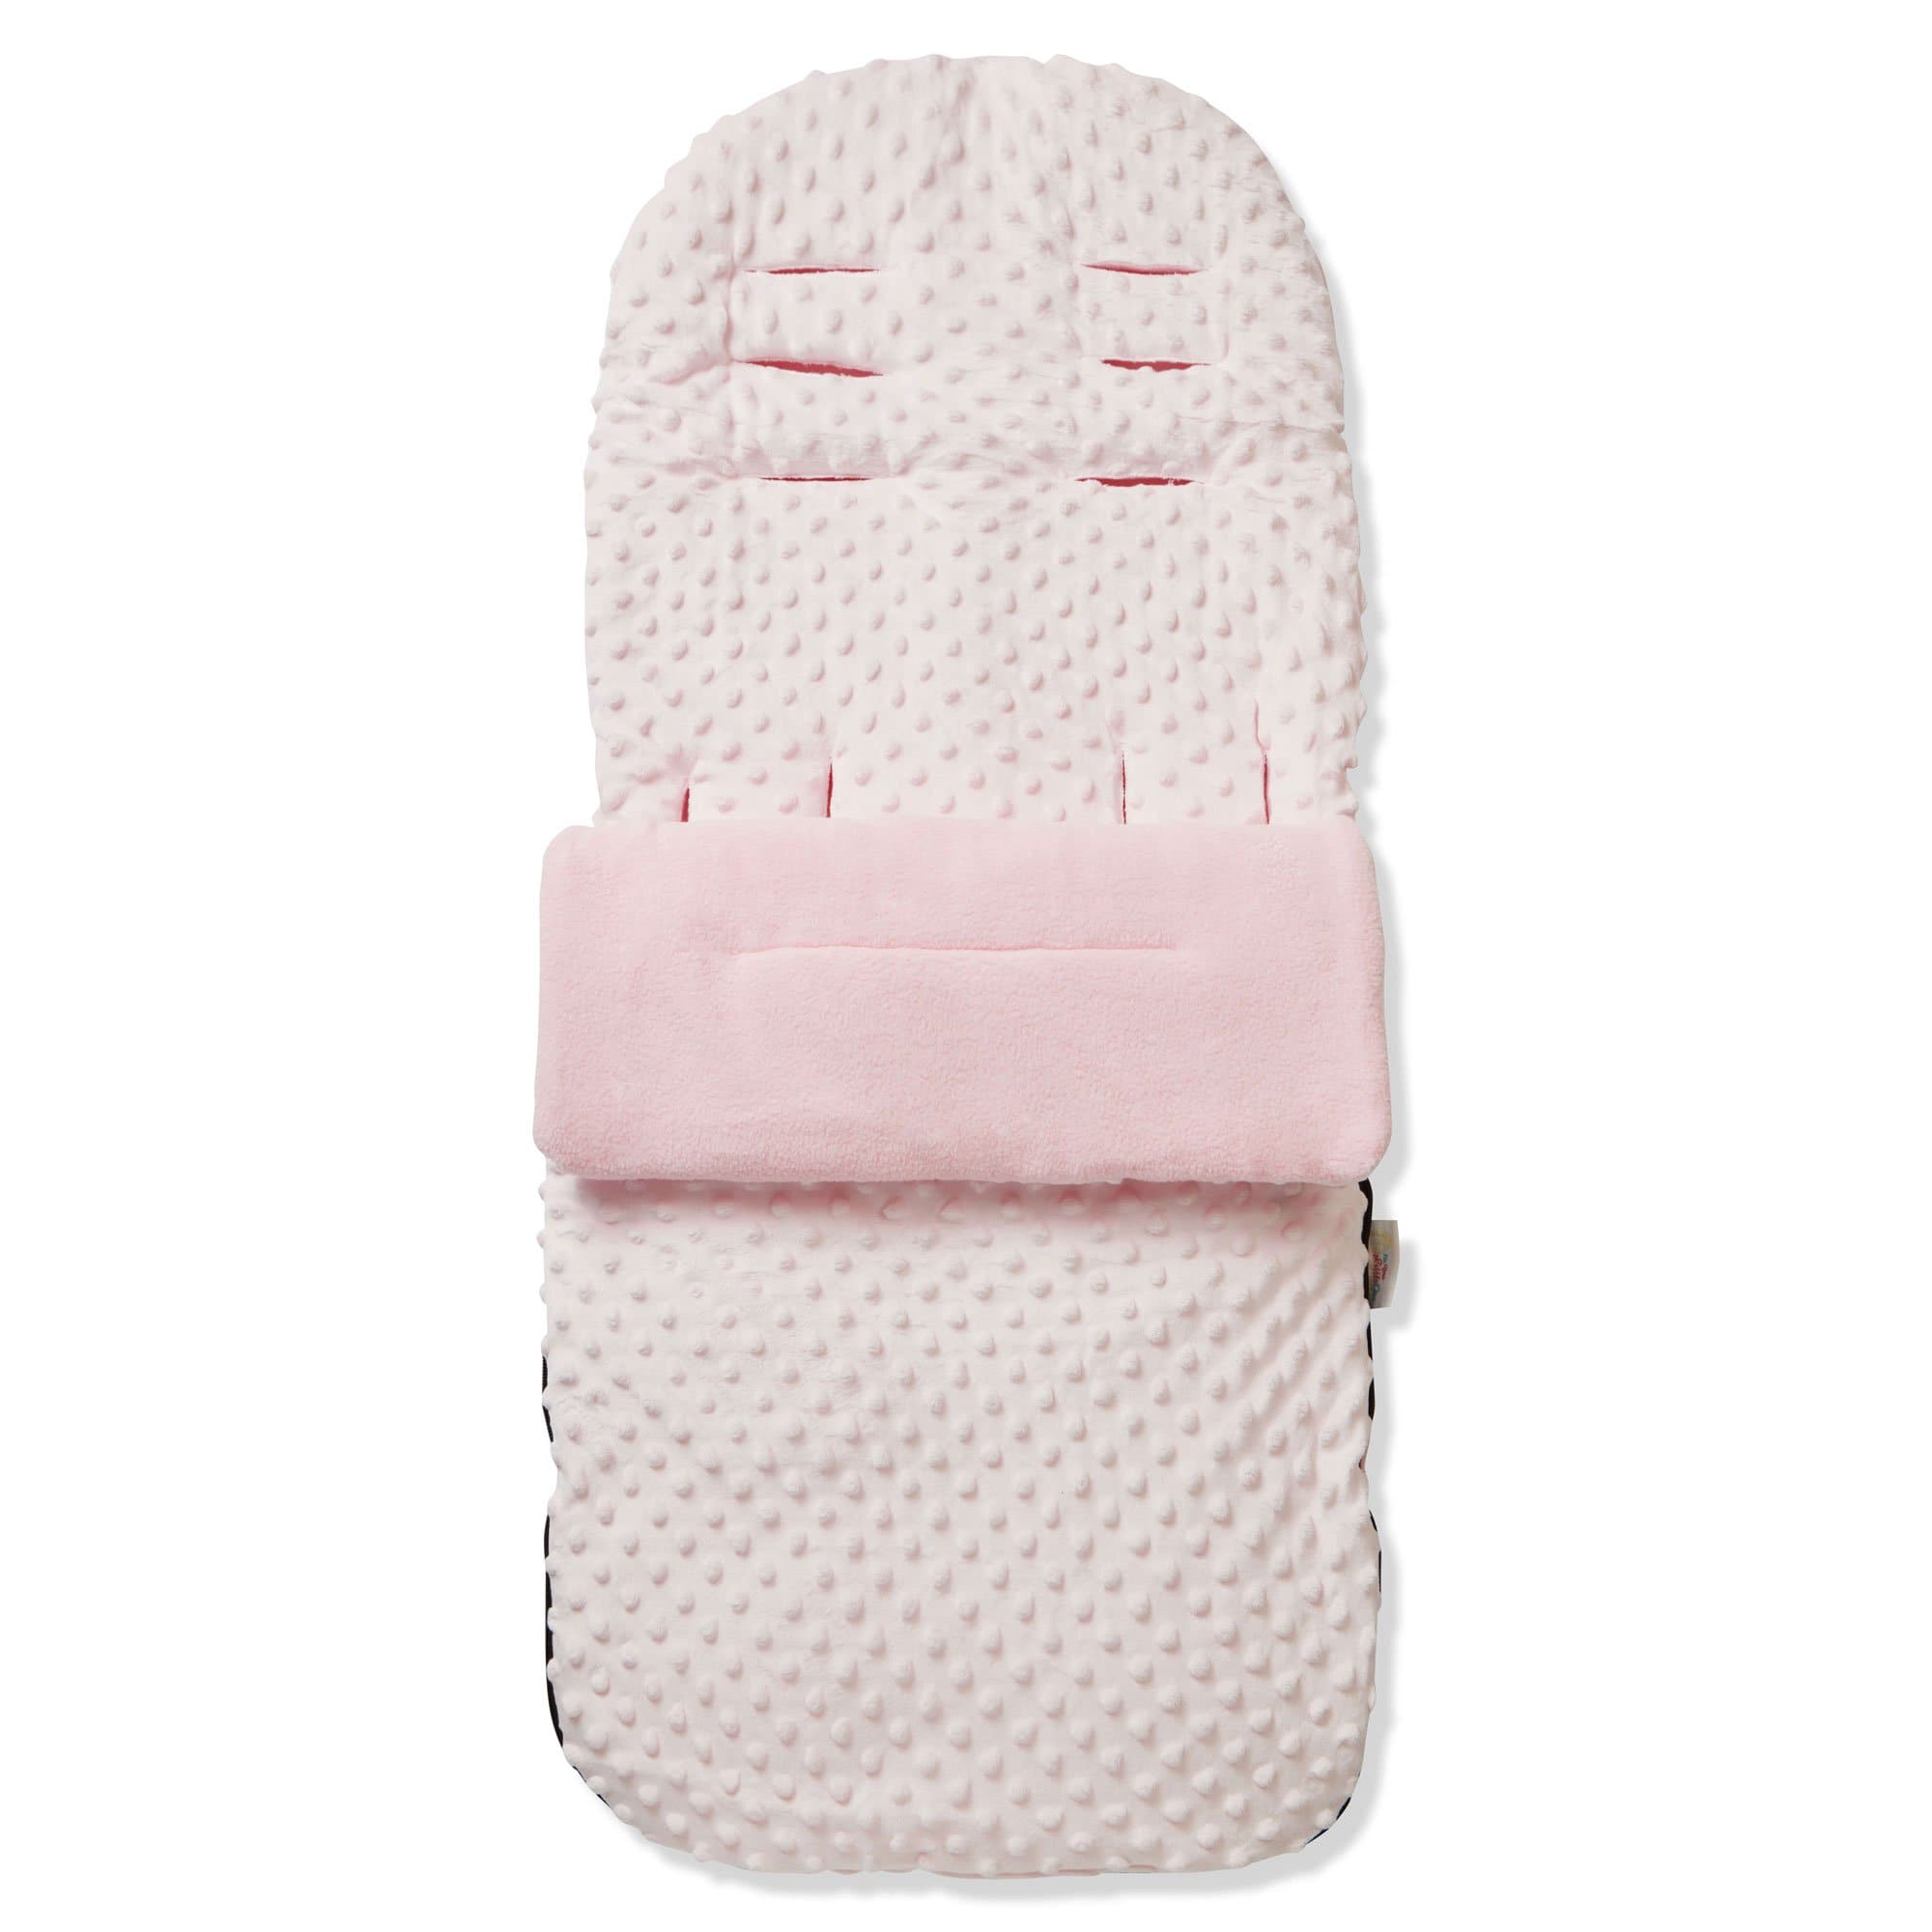 Dimple Footmuff / Cosy Toes Compatible with Looping - Pink / Fits All Models | For Your Little One